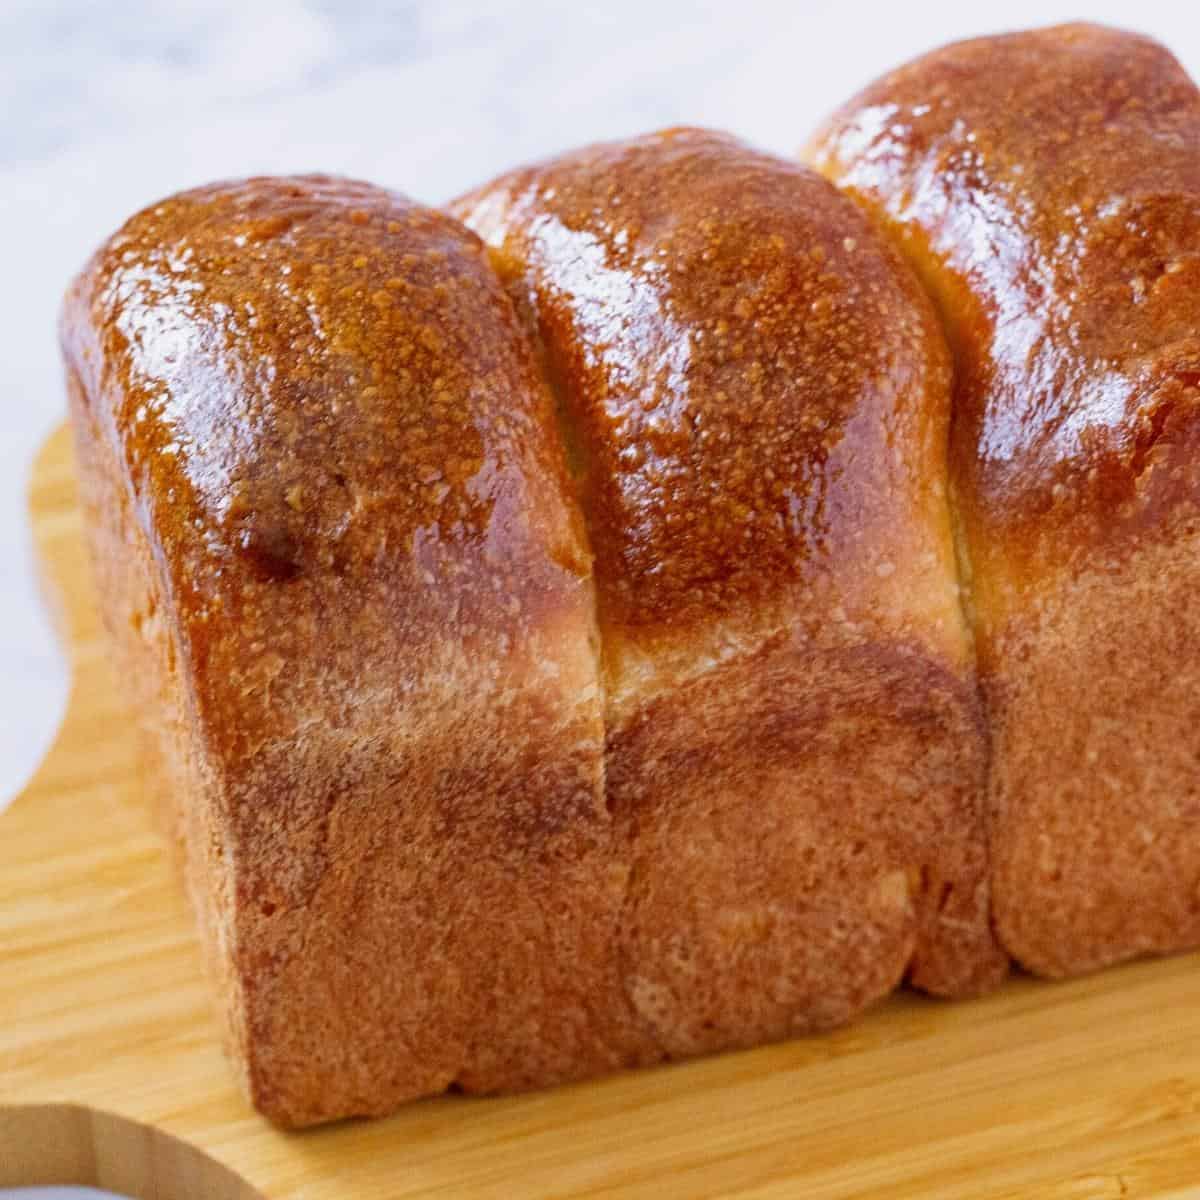 A sandwich bread on the table.